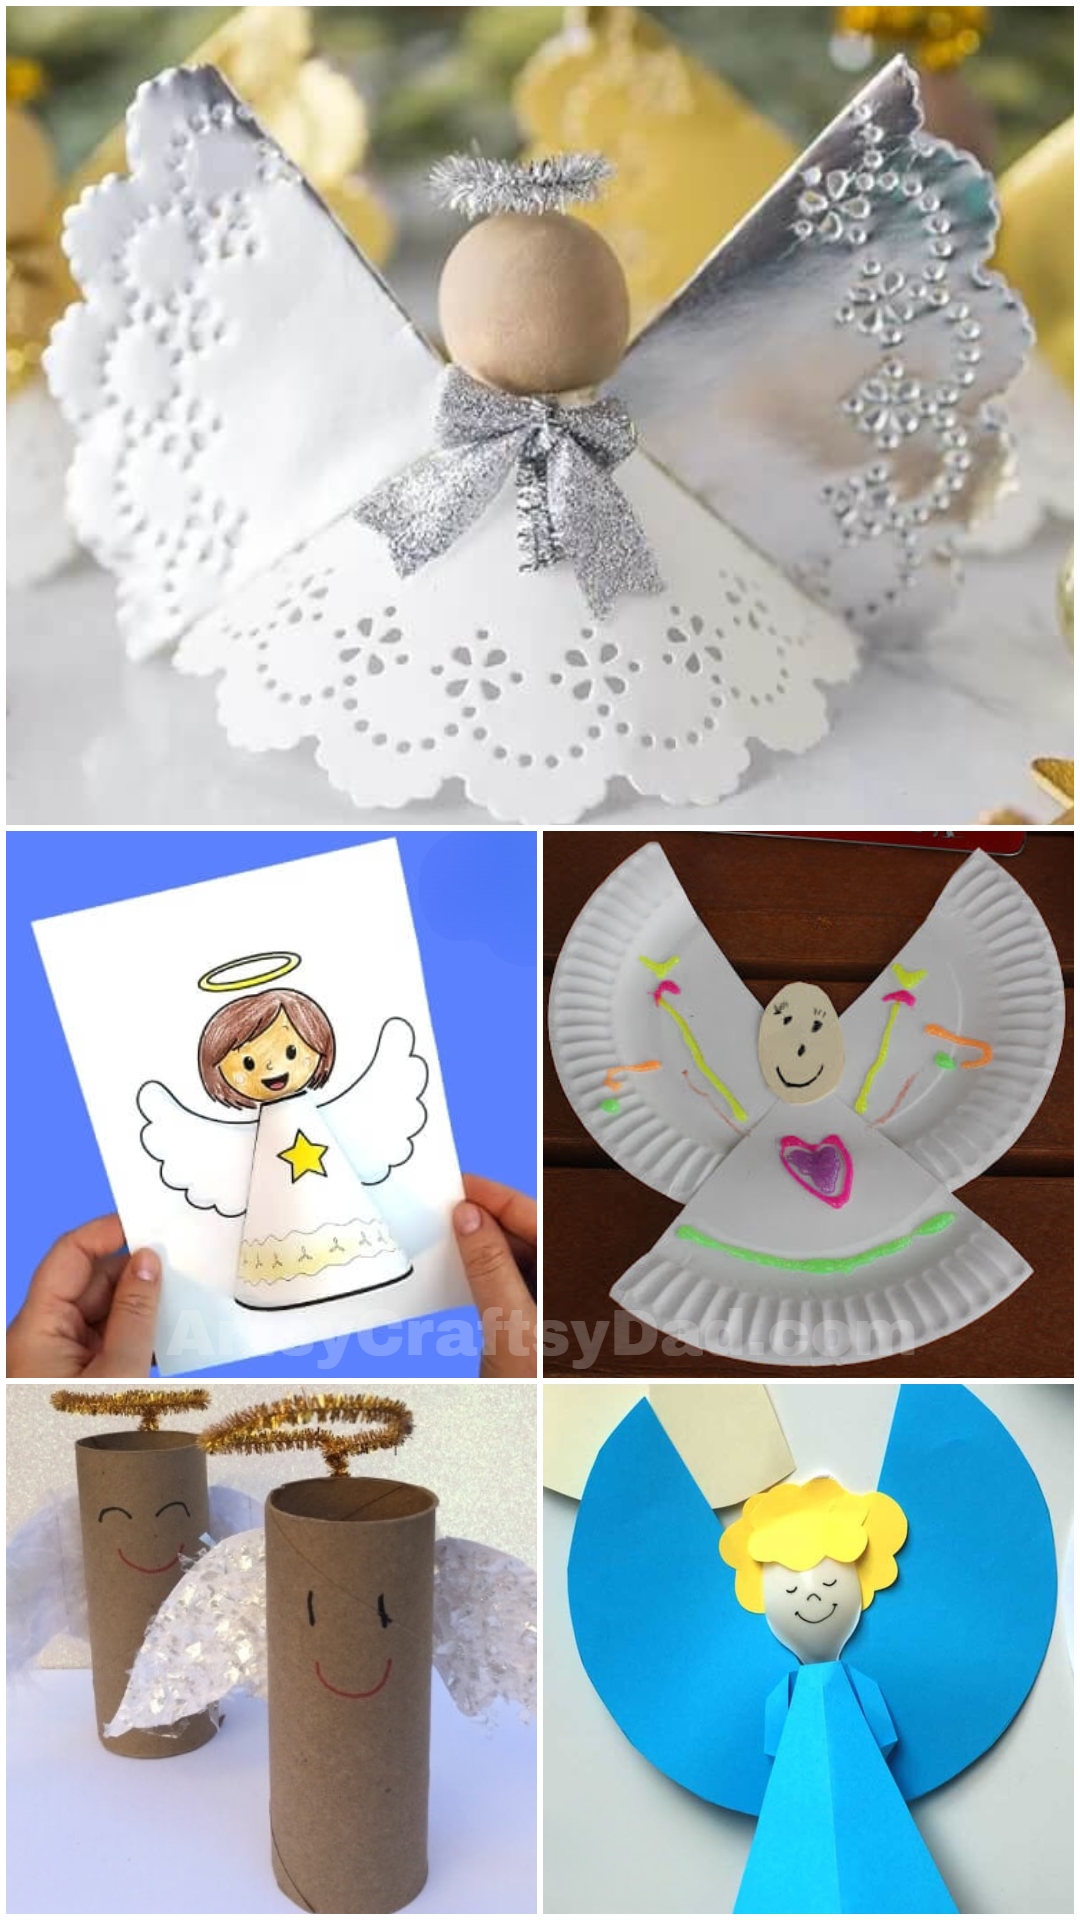 Angel Crafts Kids Can Make at Christmas